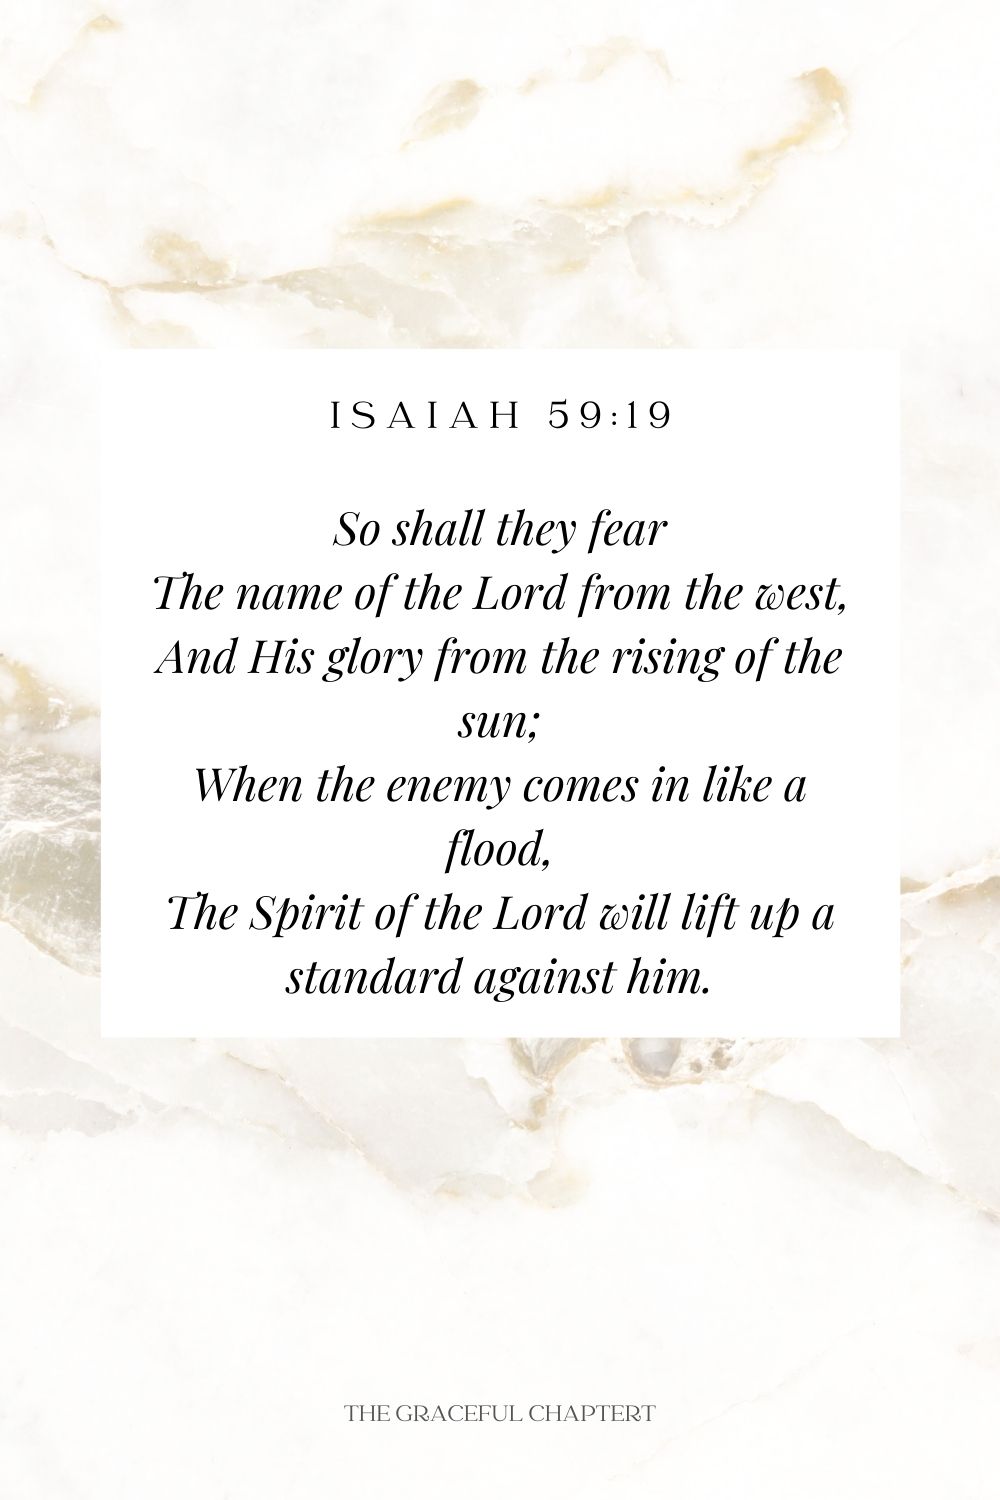 So shall they fear The name of the Lord from the west, And His glory from the rising of the sun; When the enemy comes in like a flood, The Spirit of the Lord will lift up a standard against him. Isaiah 59:19